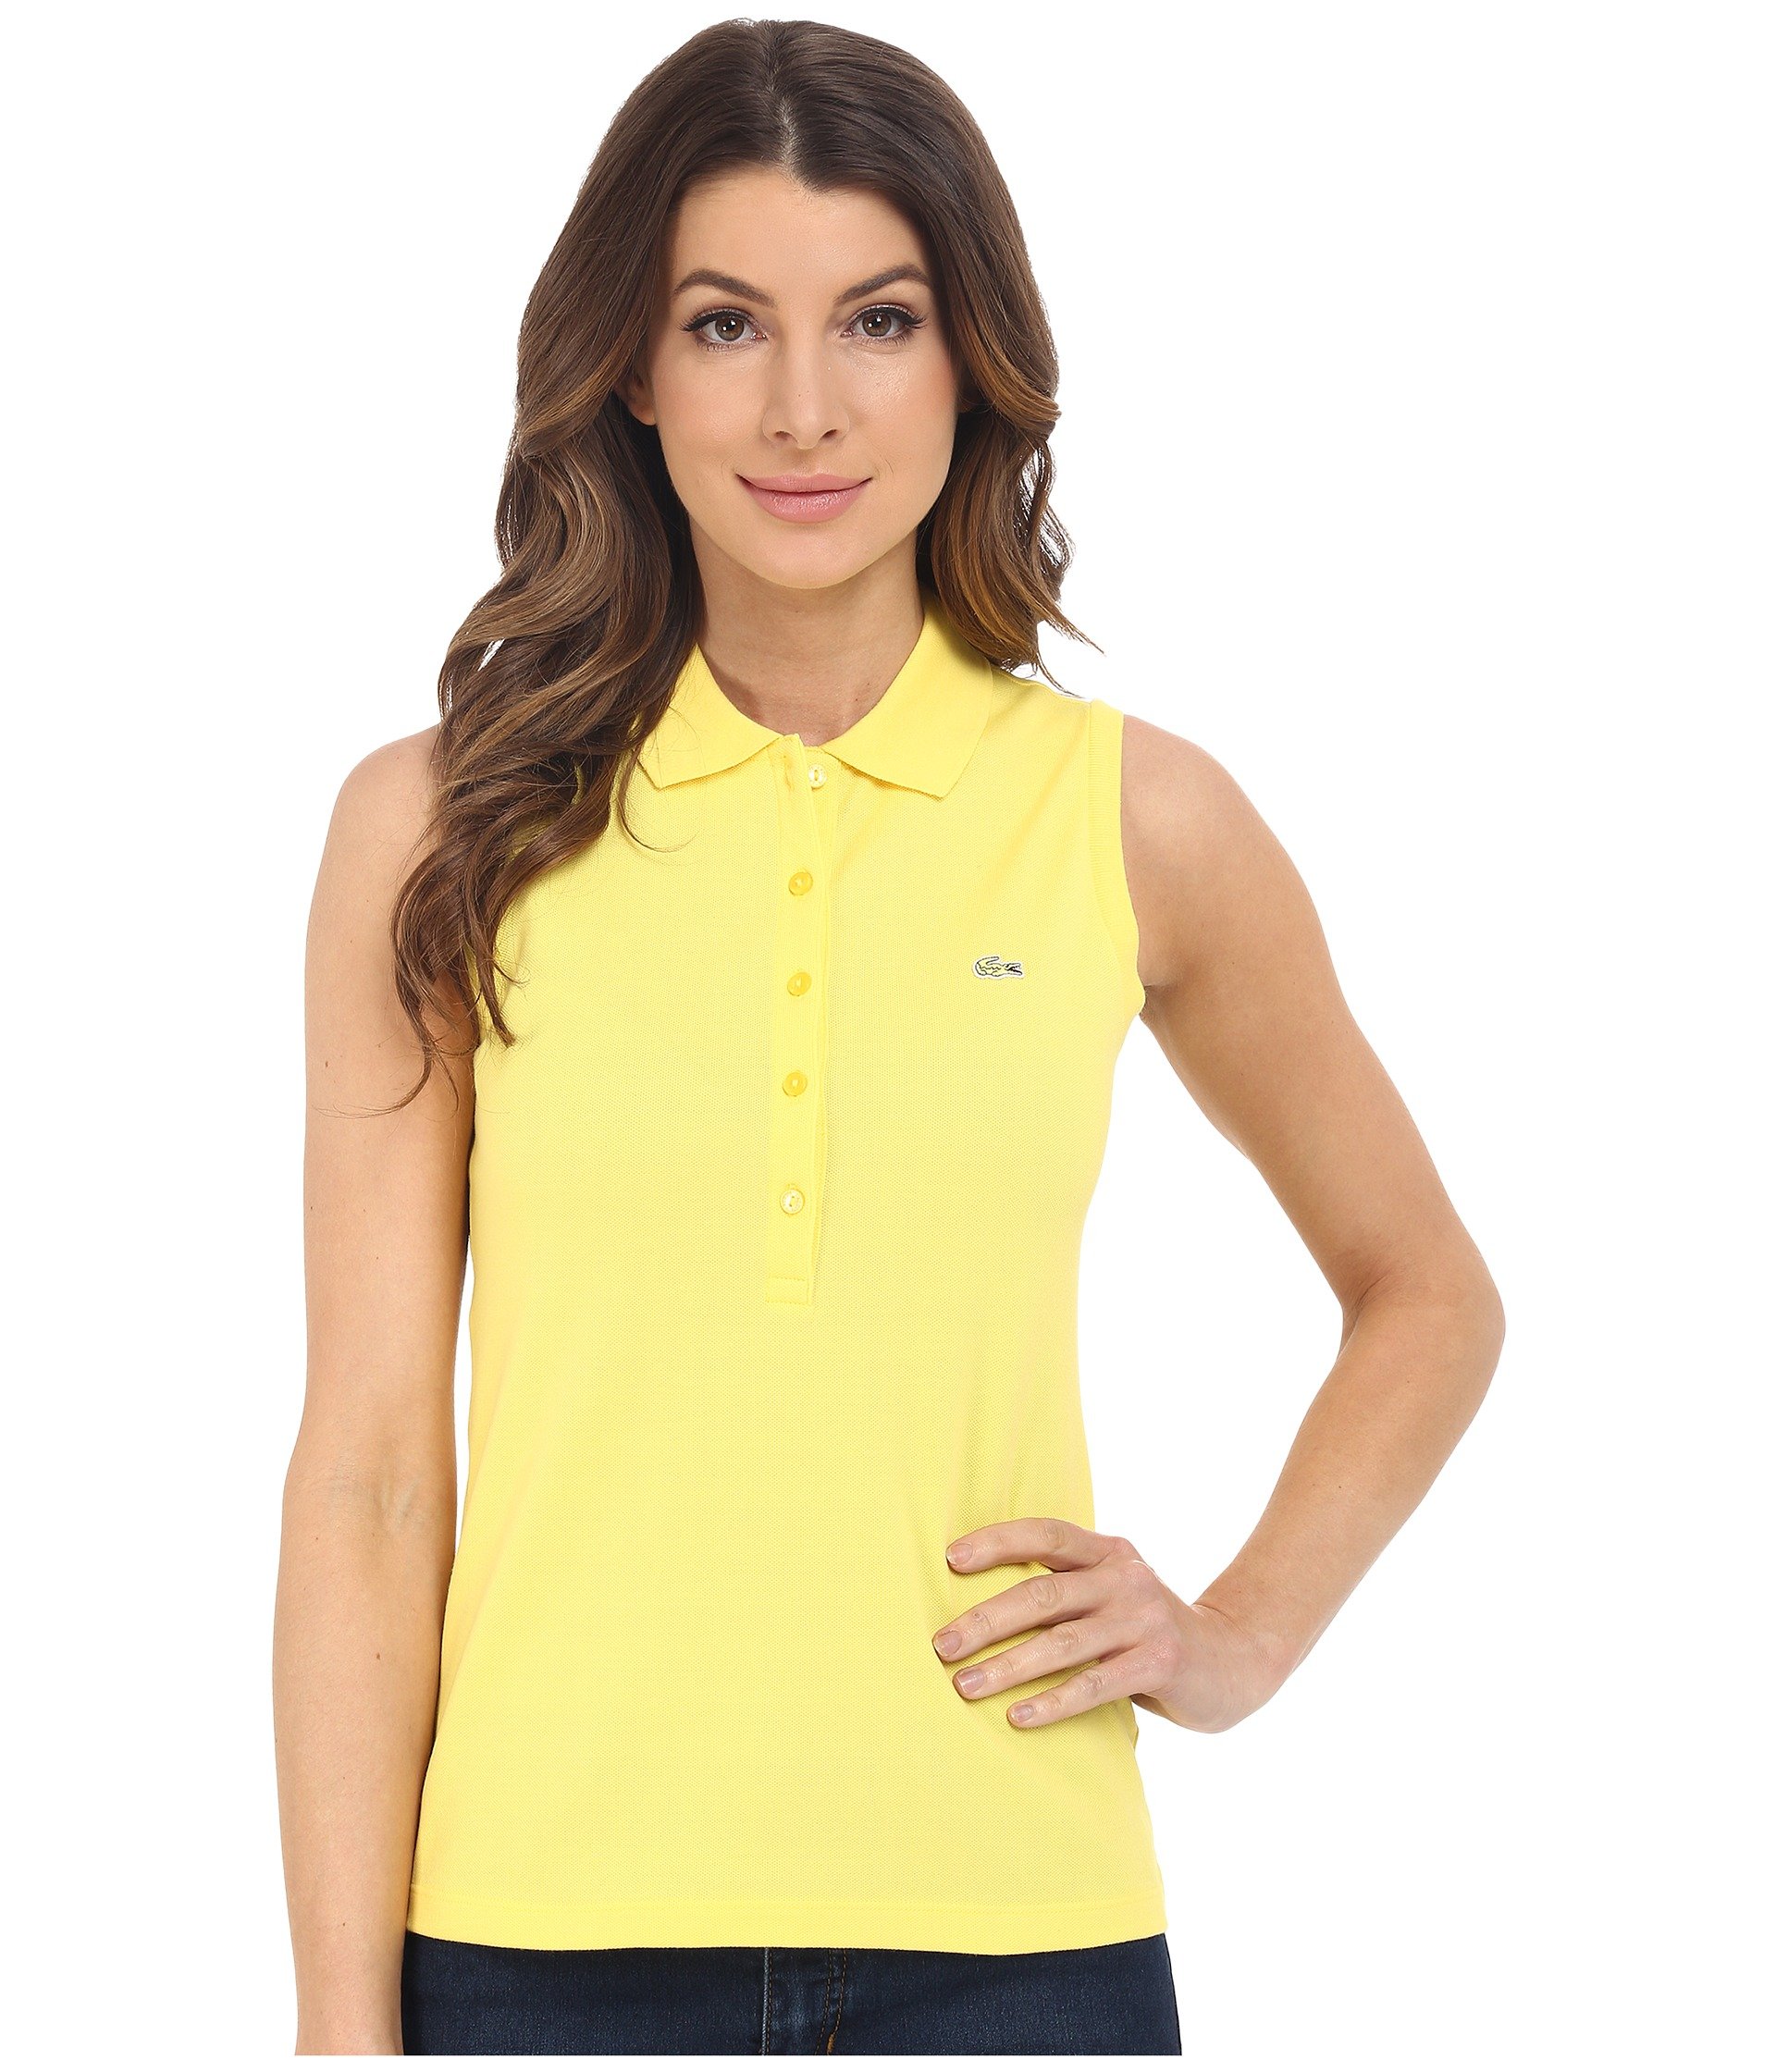 Lacoste Sleeveless Slim Fit Stretch Pique Polo Shirt in Yellow - Lyst